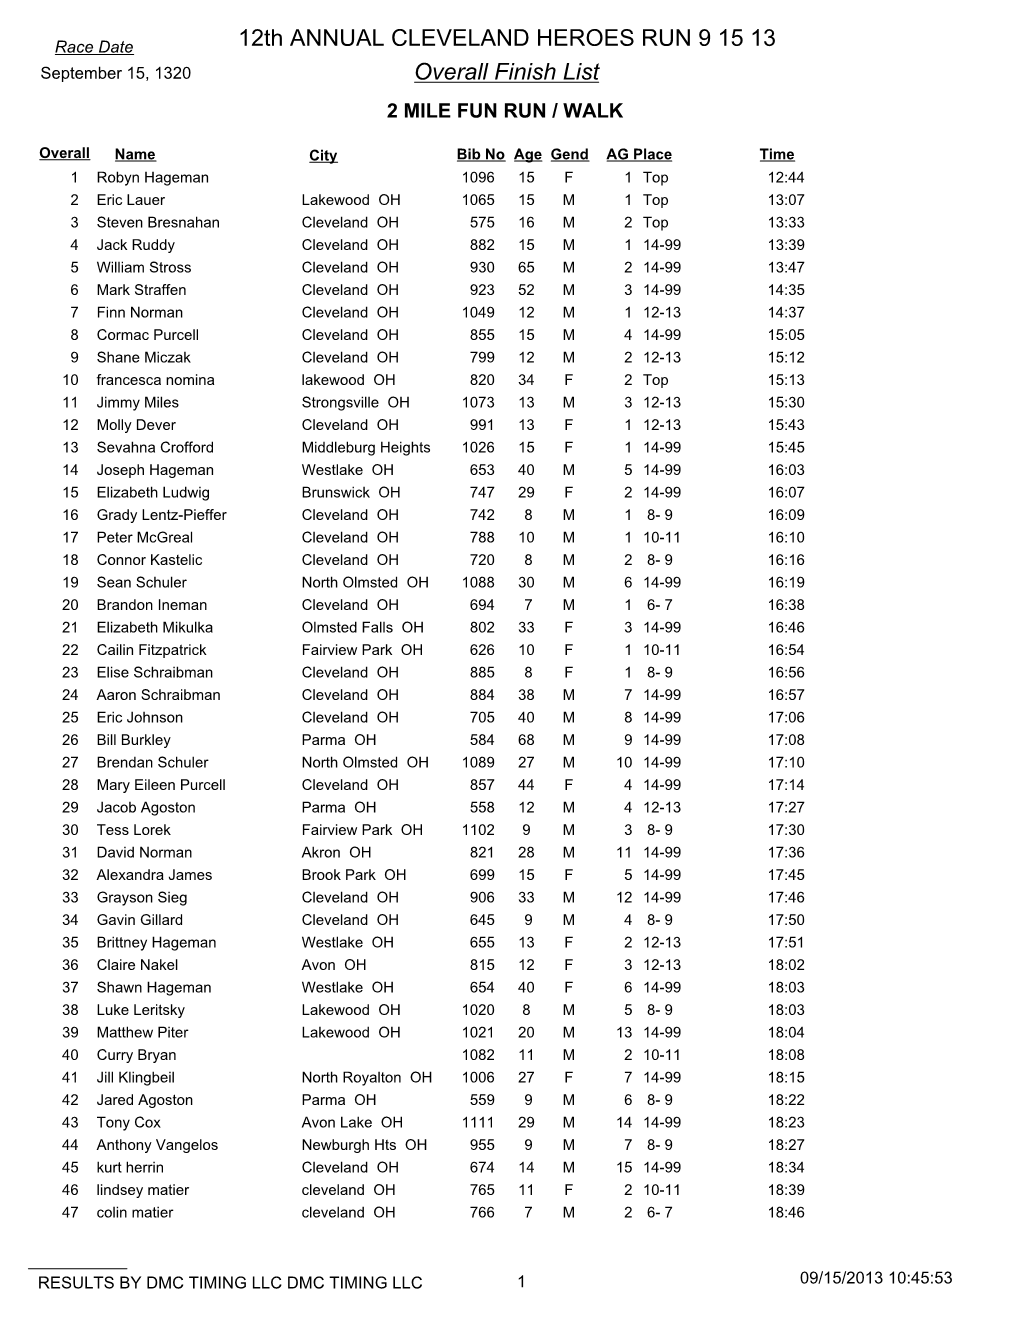 12Th ANNUAL CLEVELAND HEROES RUN 9 15 13 Overall Finish List